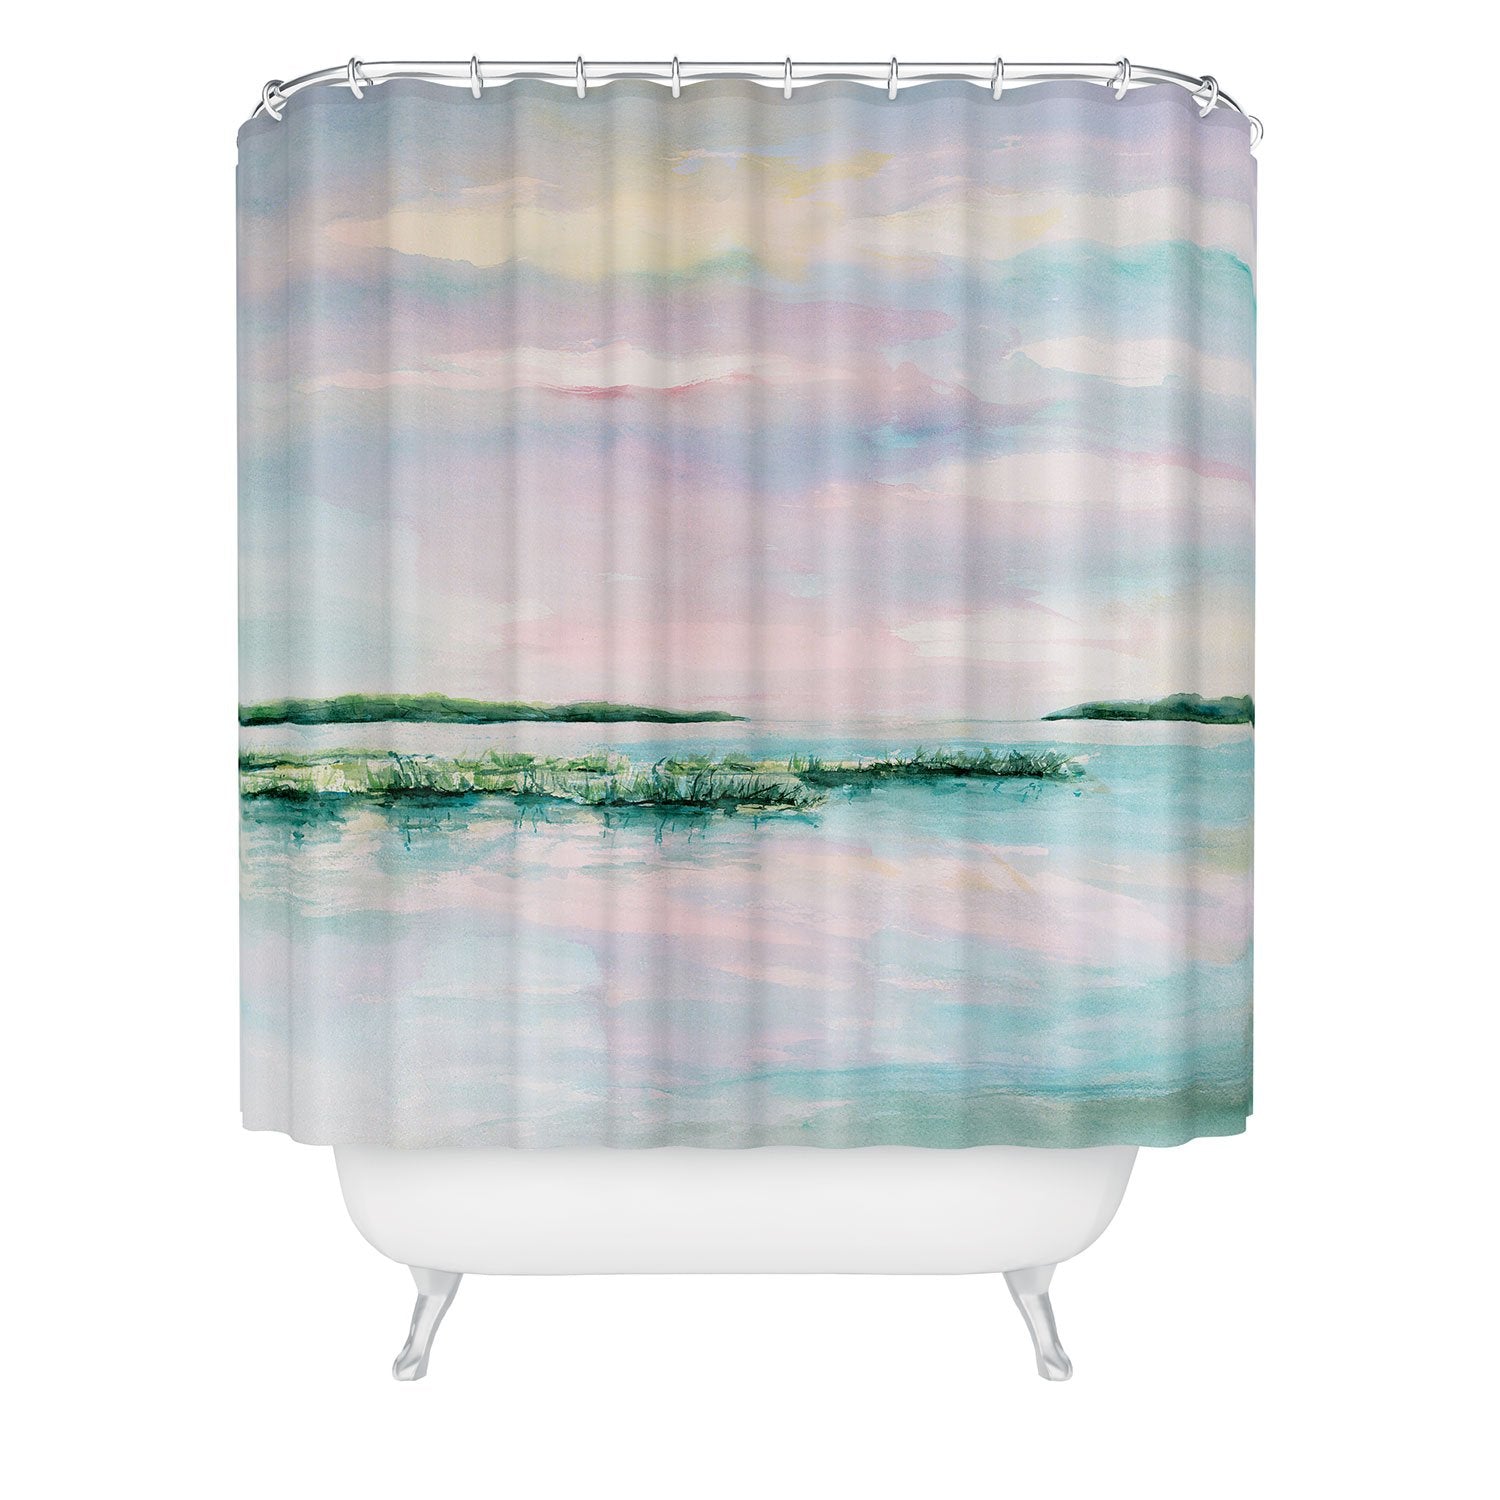 Cotton Candy Skies Shower Curtain